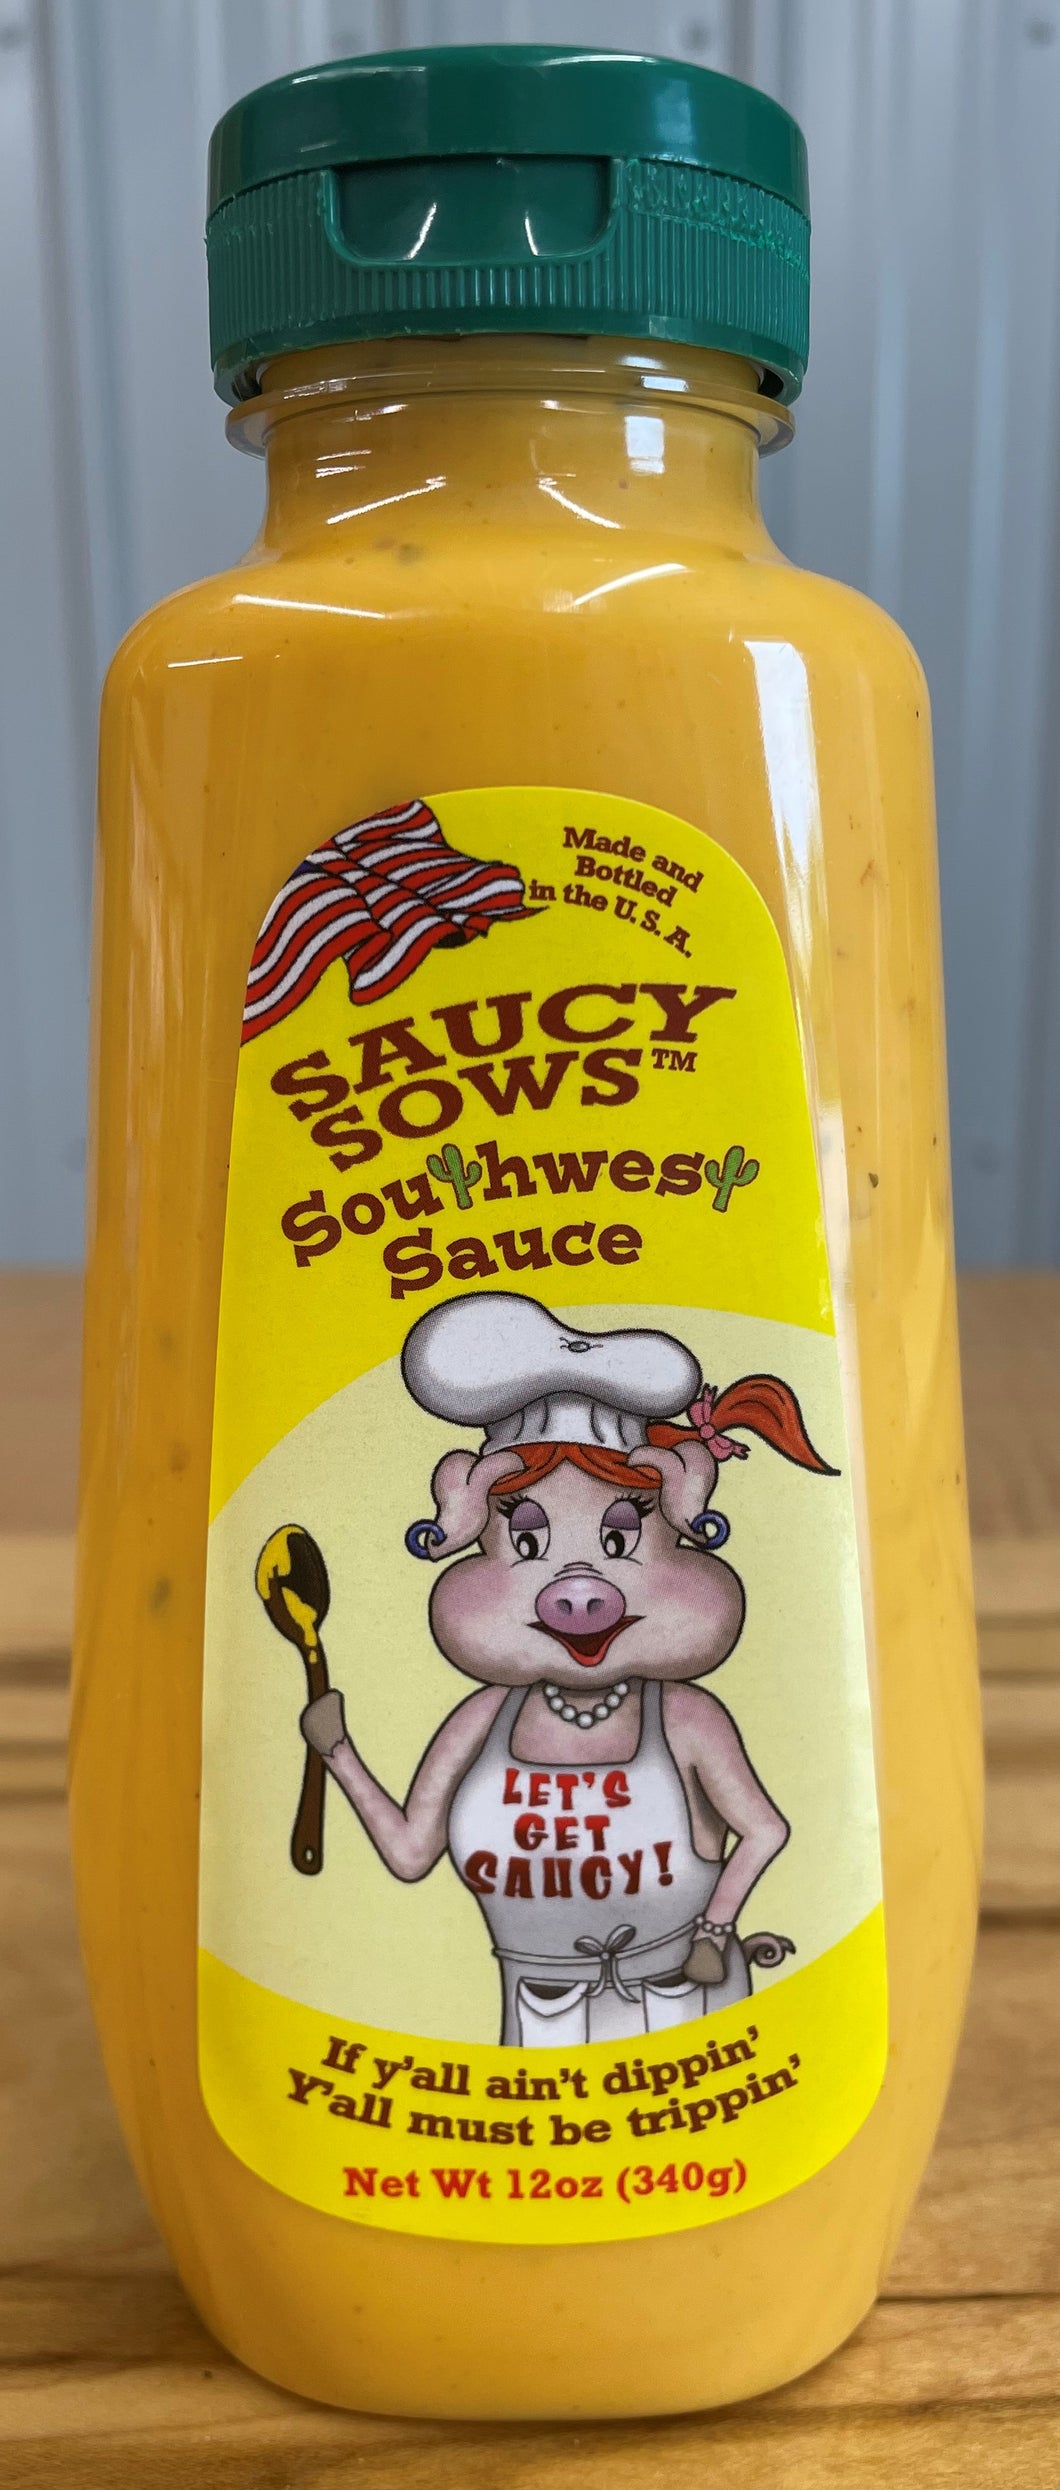 saucy sows